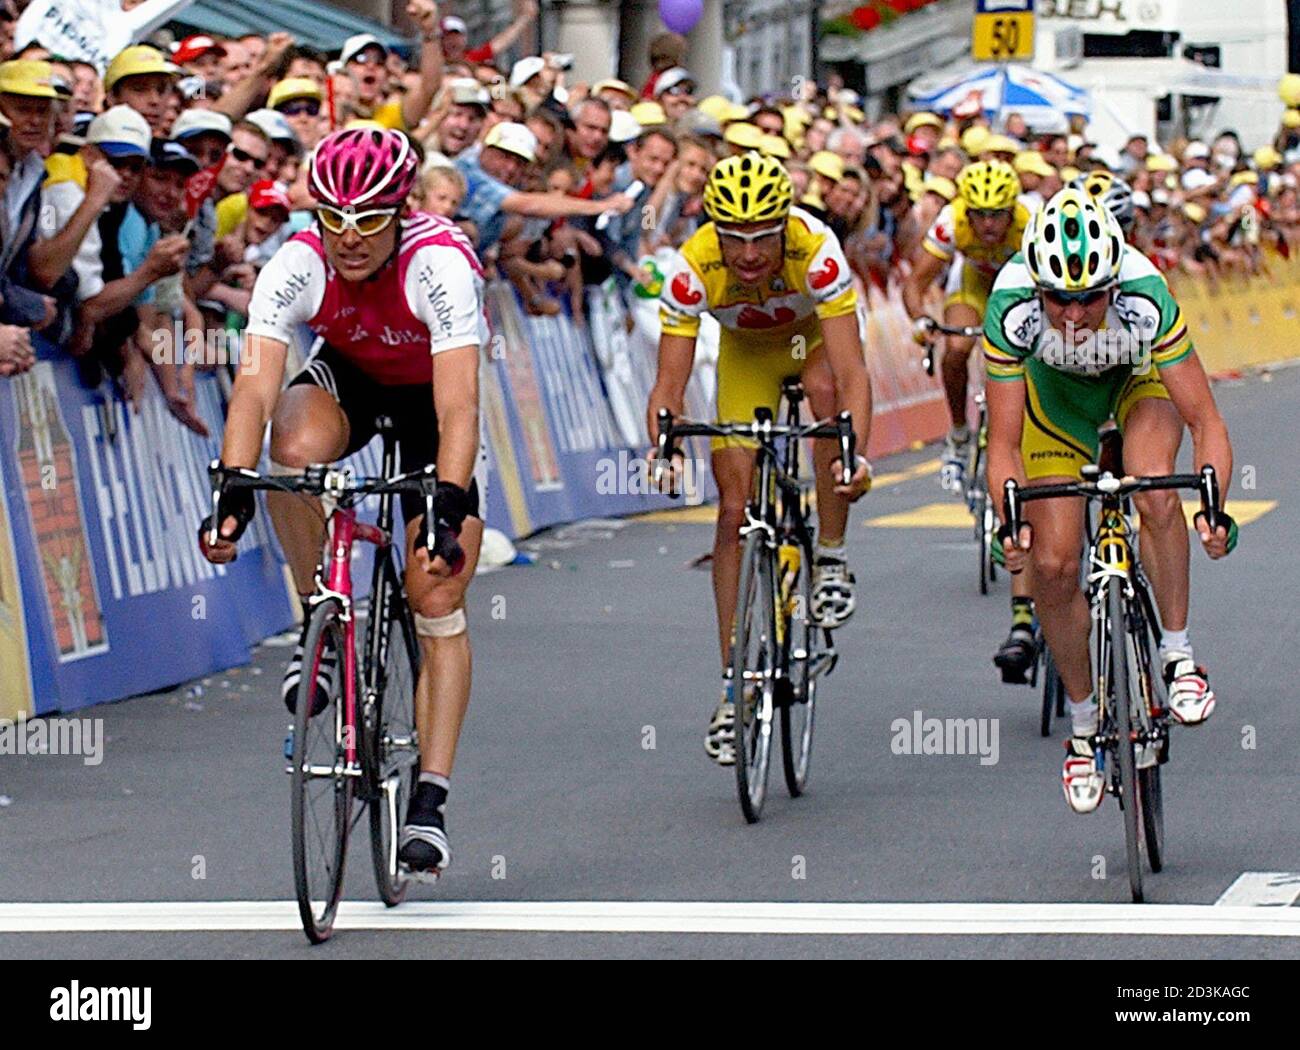 German T-Mobile rider Jan Ullrich (L) wins the first stage of the Tour de  Suisse cycling race in Beromuenster, Switzerland, June 12, 2004 ahead of  second placed Oscar Camenzind (R) and third